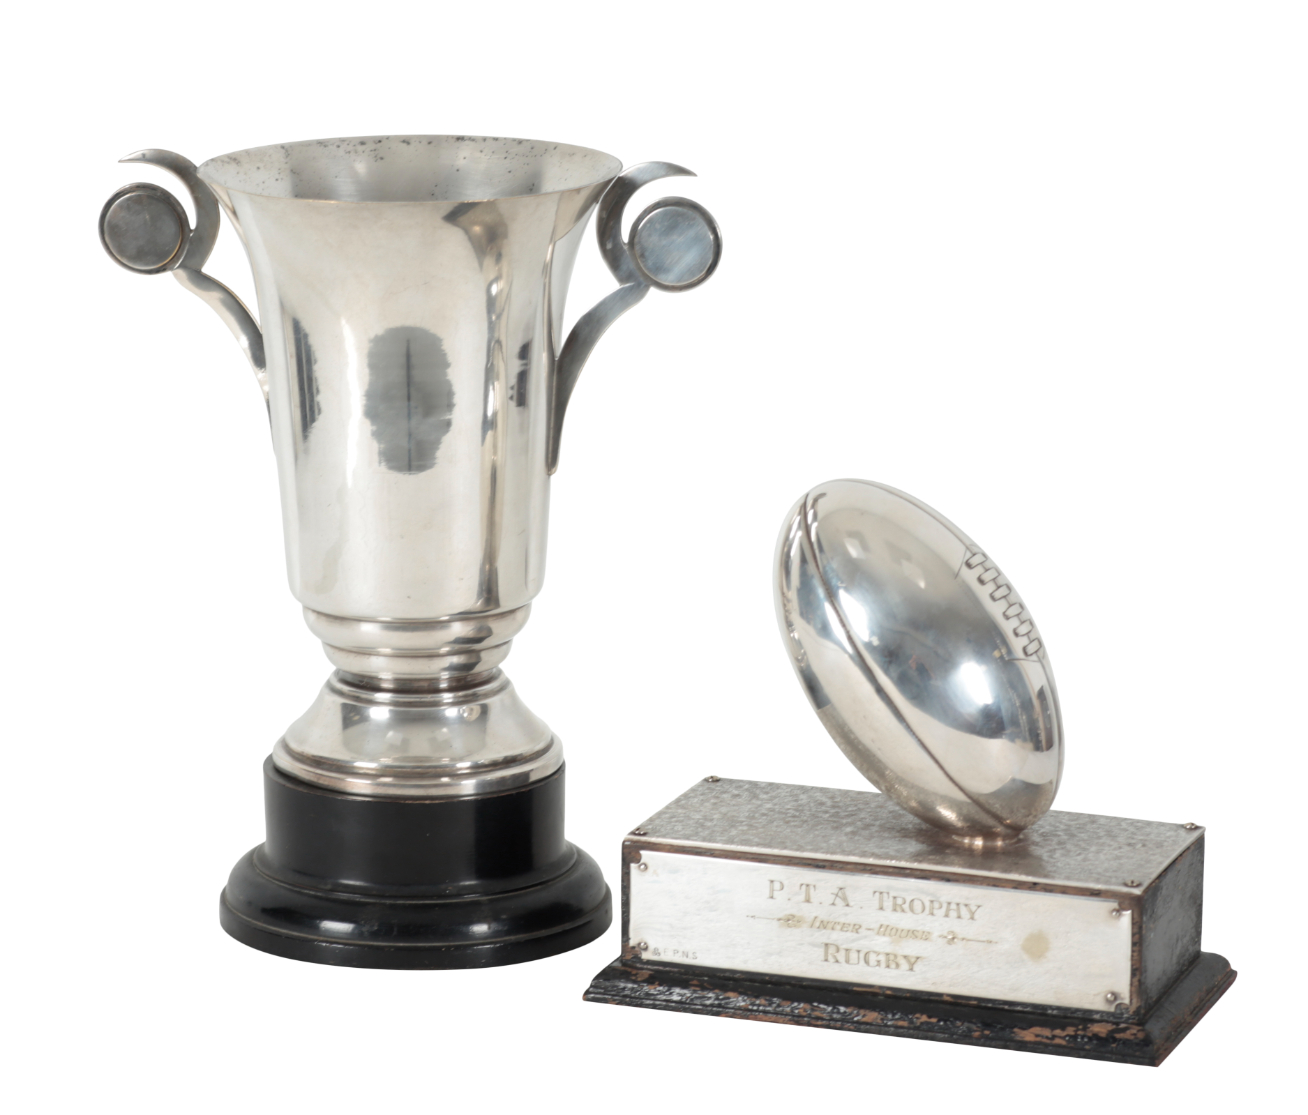 A SILVER PLATED RUGBY TROPHY P.T.A.